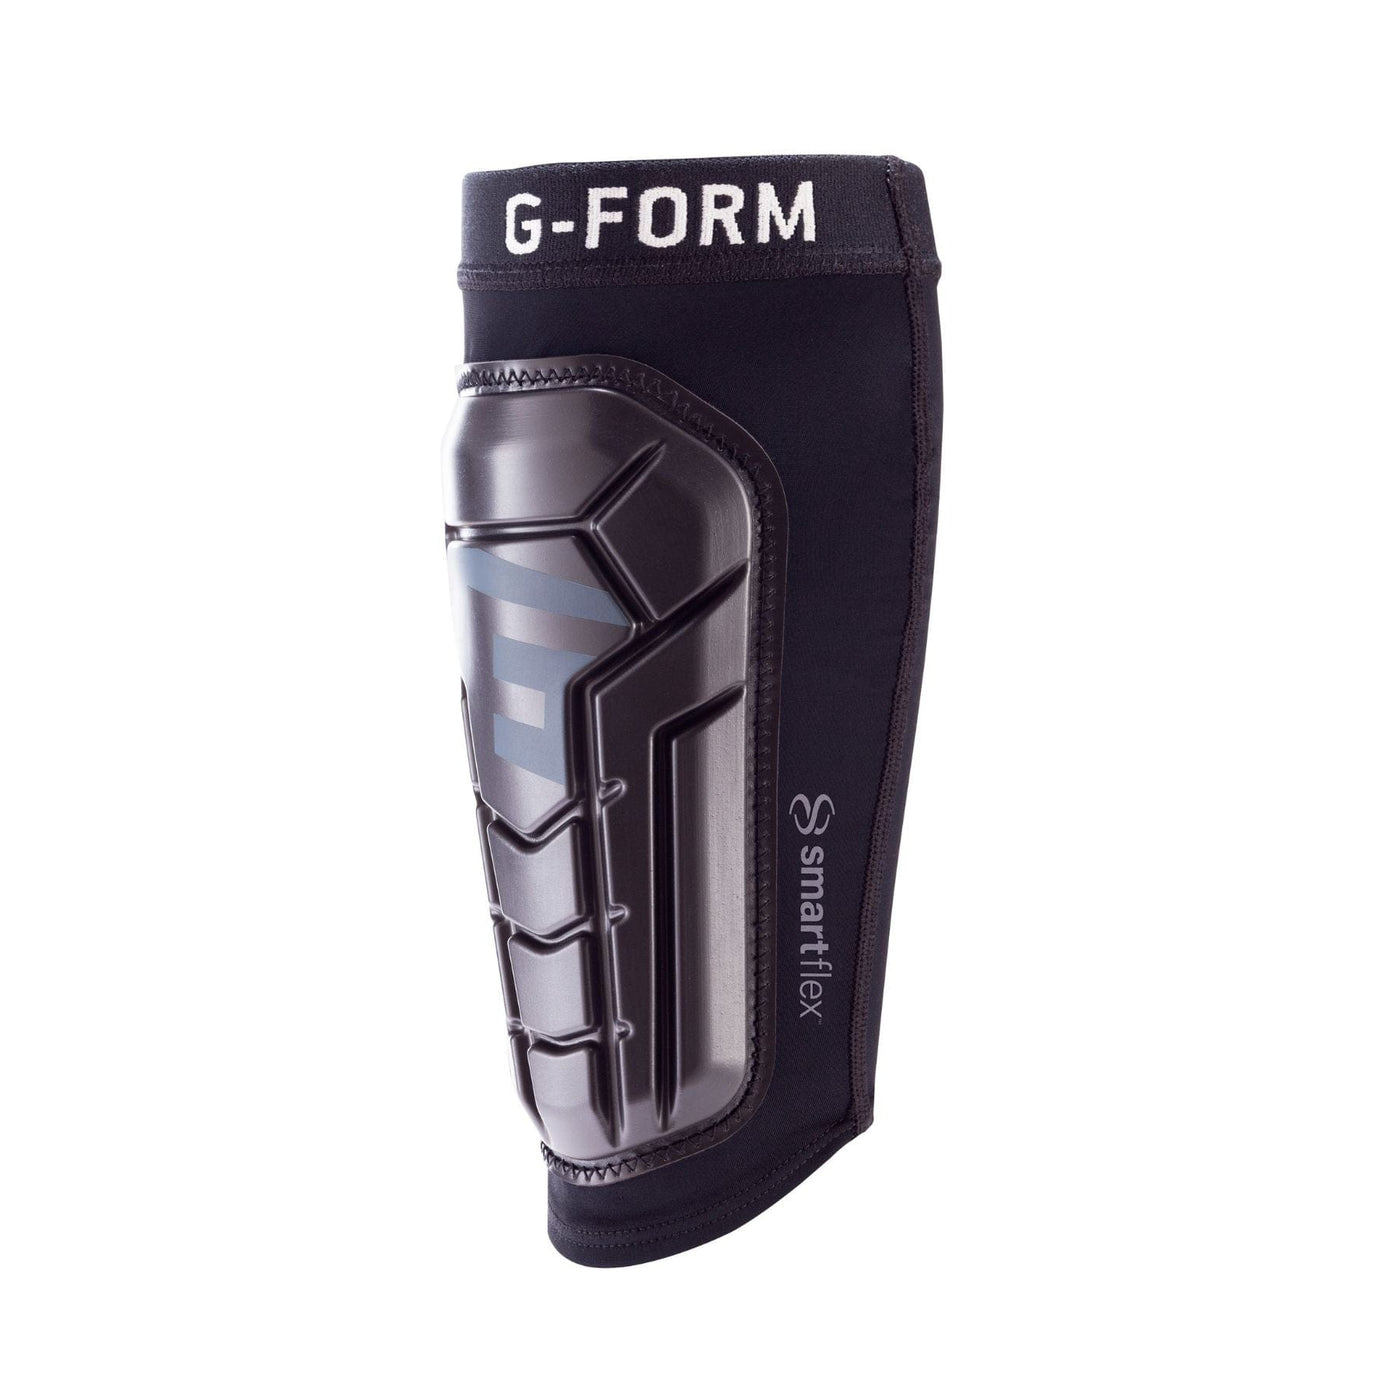 G-Form Shin Guards for Football Pro-S Vento - Black 8Lines Shop - Fast Shipping